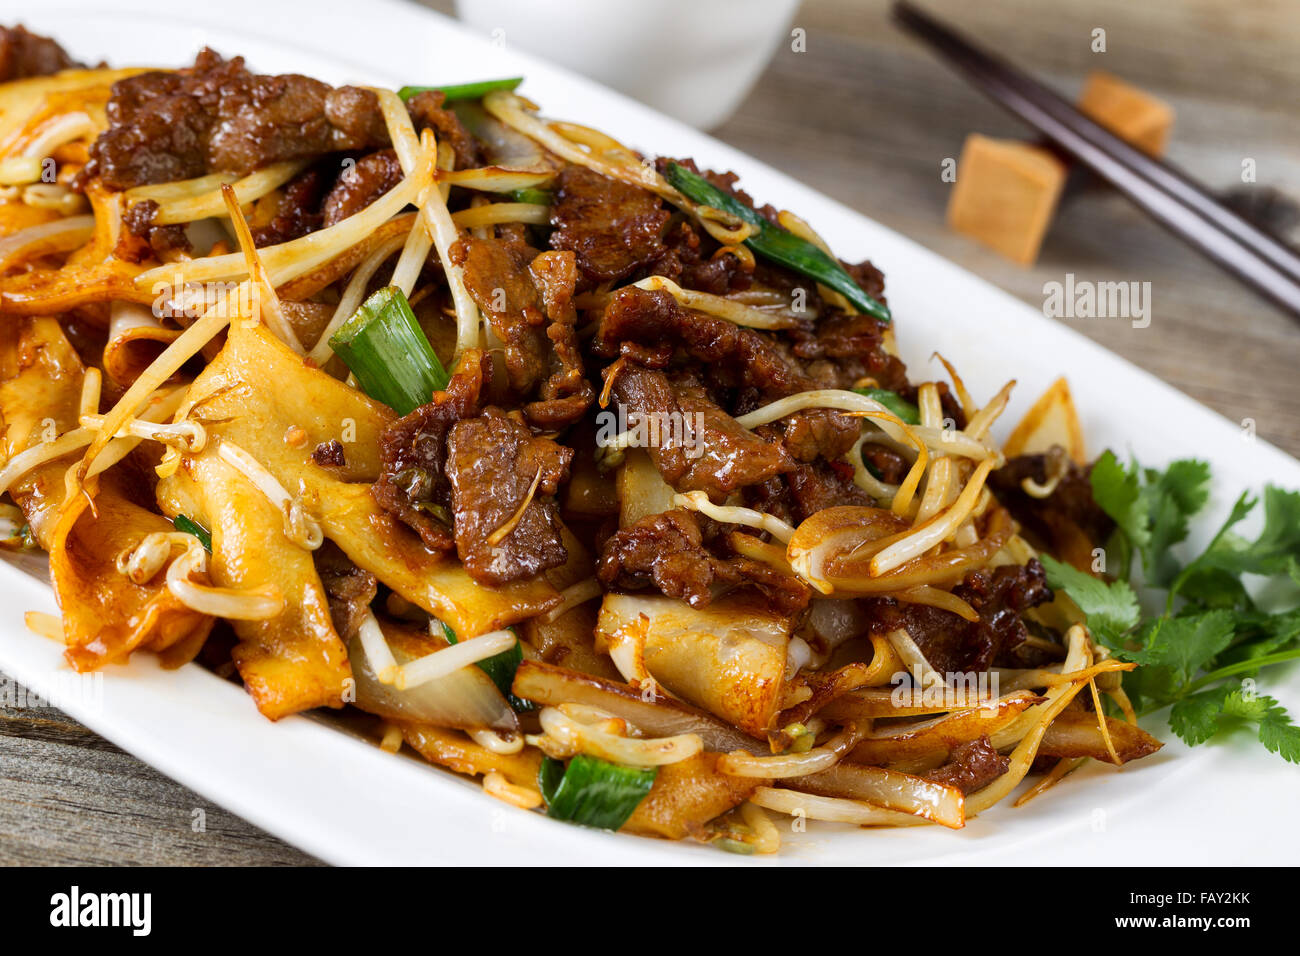 Close up front view of freshly cooked spicy beef, bean sprouts, onion, and tofu with parsley as garnish and chopsticks in holder Stock Photo